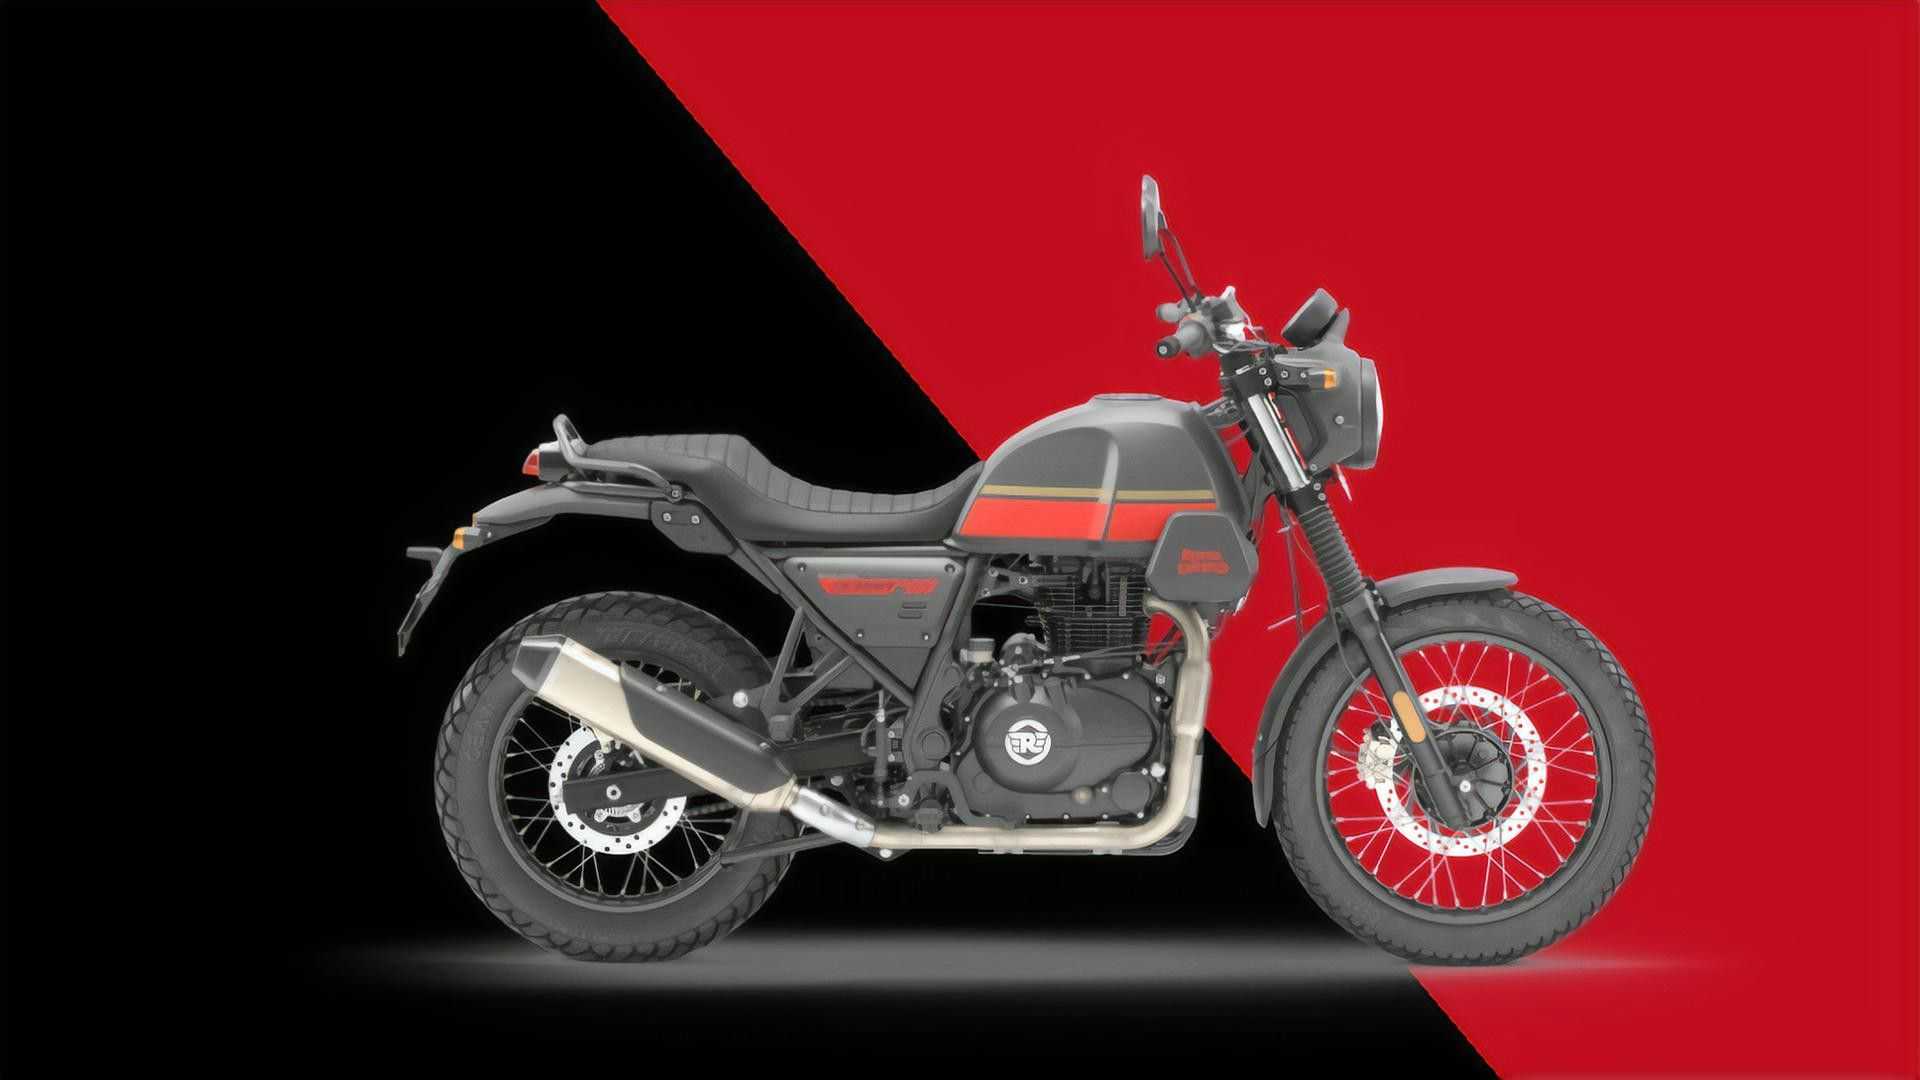 Royal Enfield Scram 411 Blazing Black News, Motorcycle Reviews From Malaysia, Asia And The World